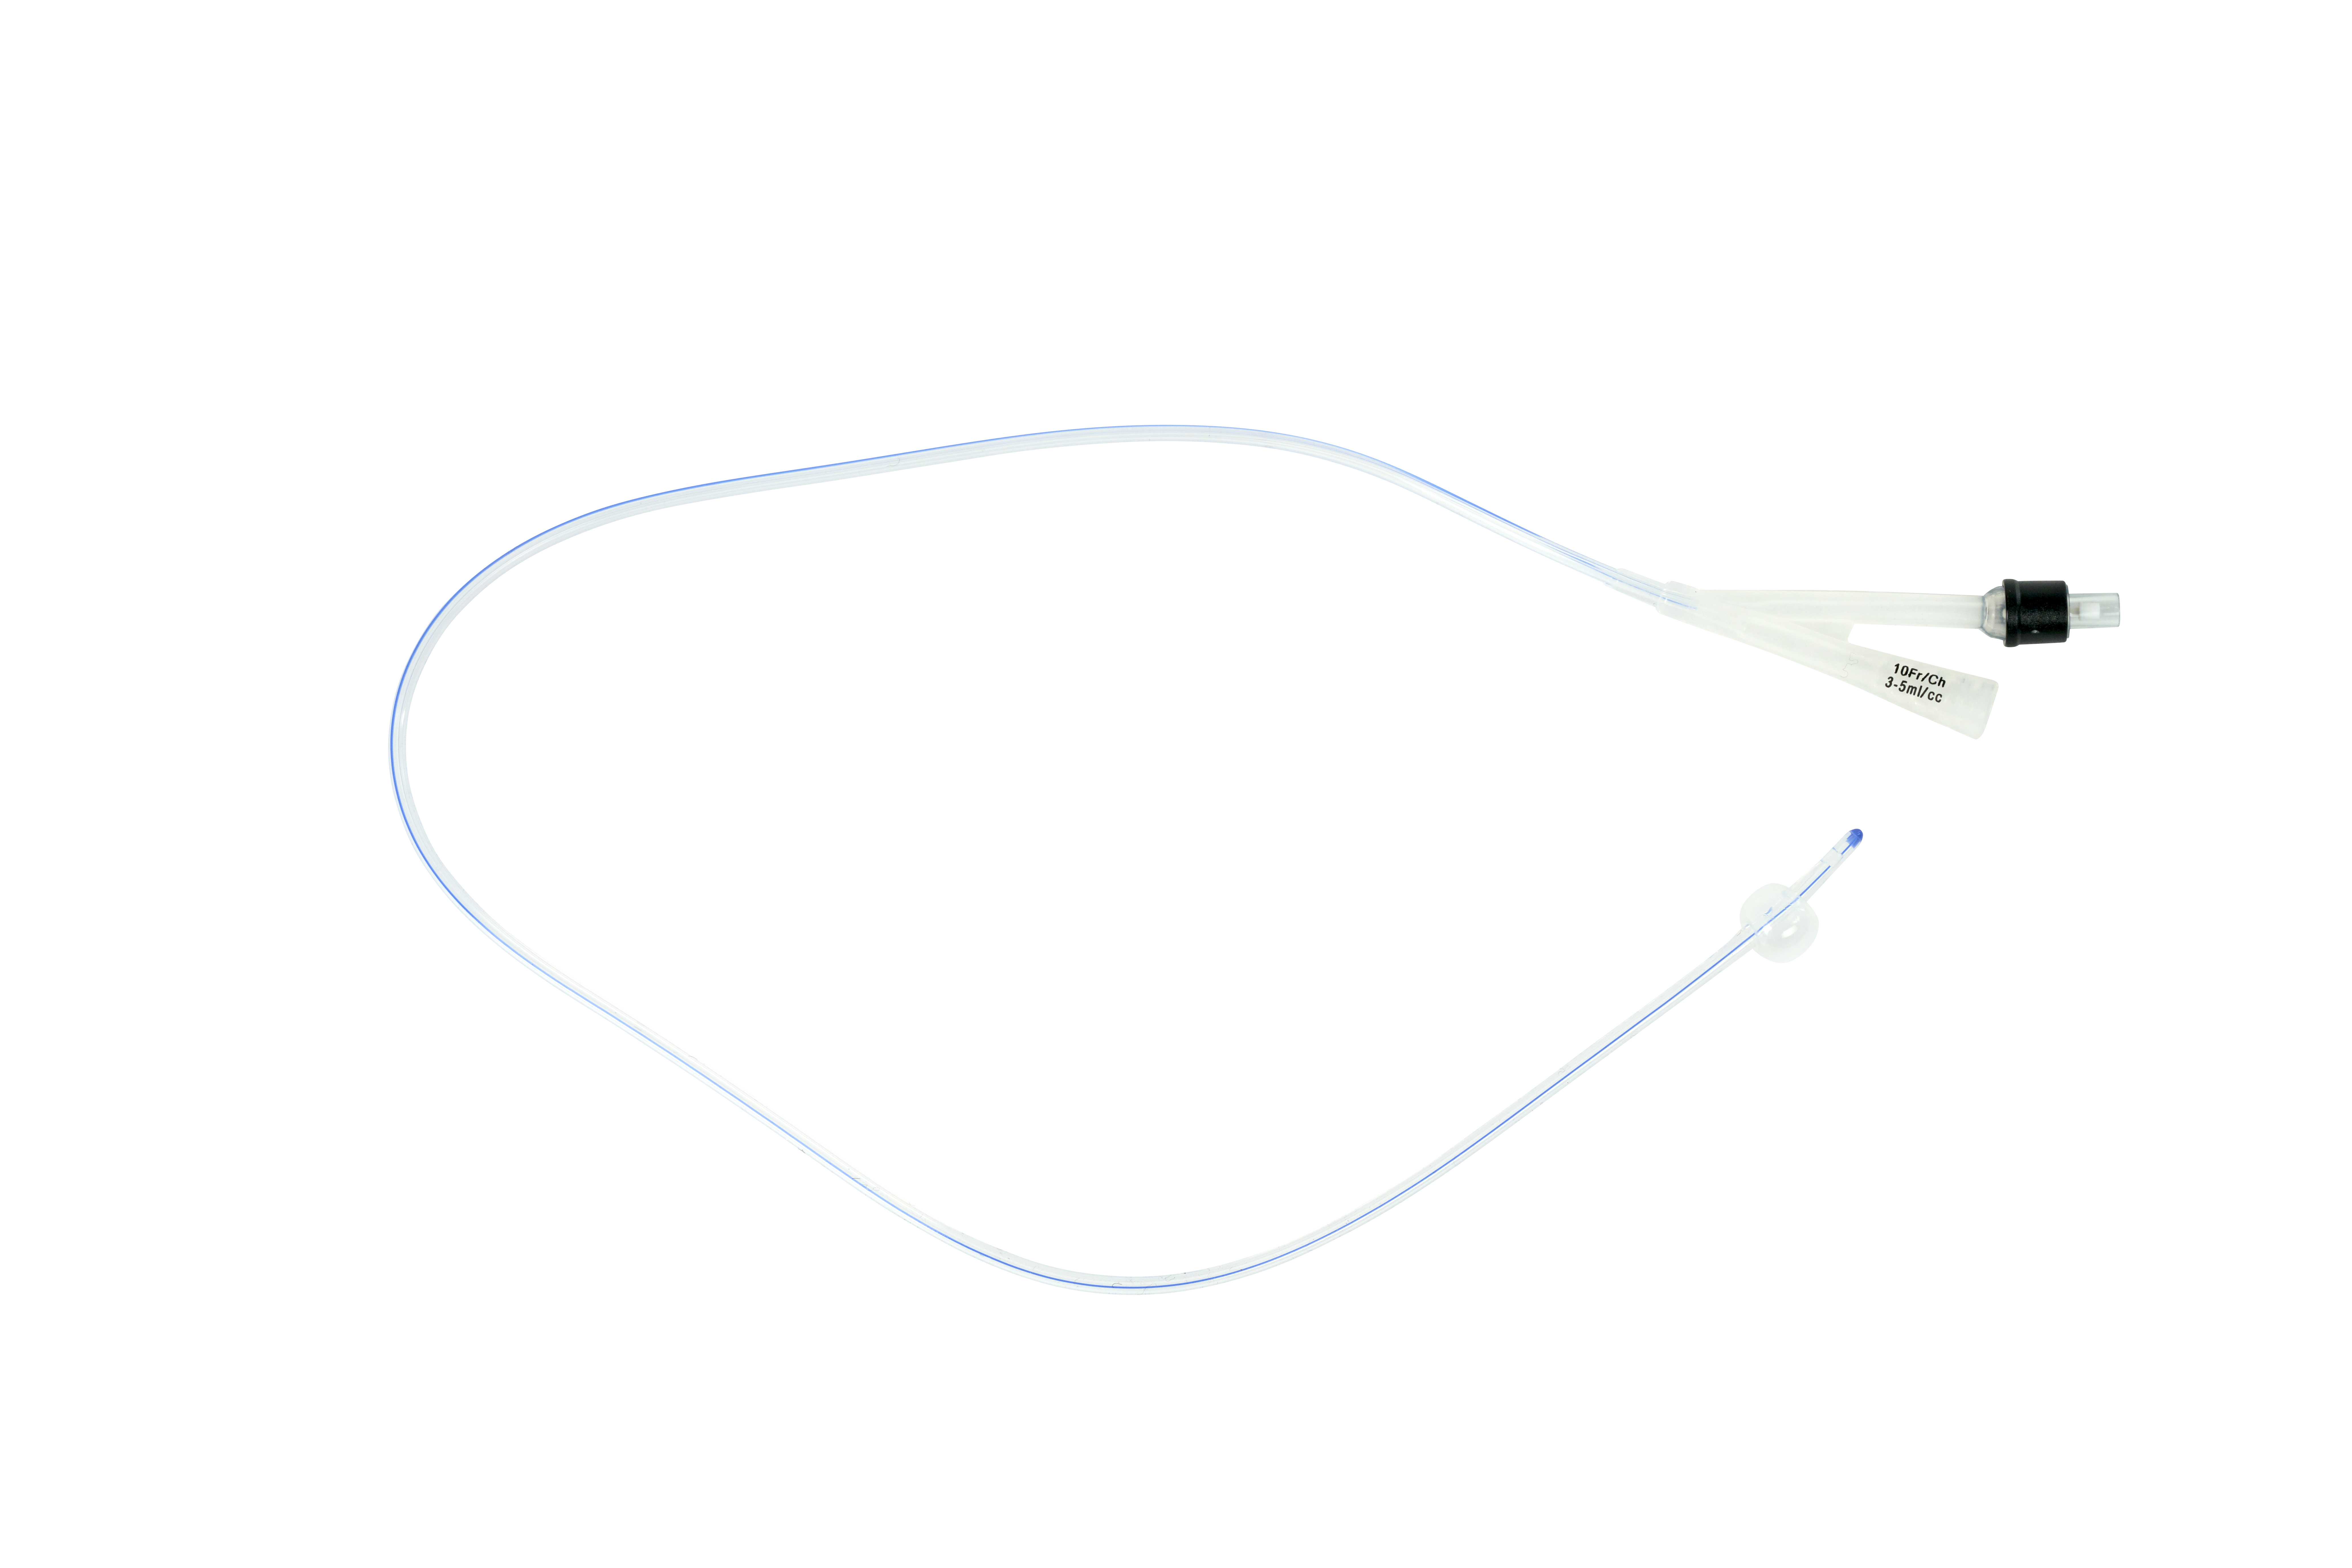 BUSTER Foley Catheter, Silicone, 10 Fr x 28”, 3.3 mm x 70 cm, 5/pk
